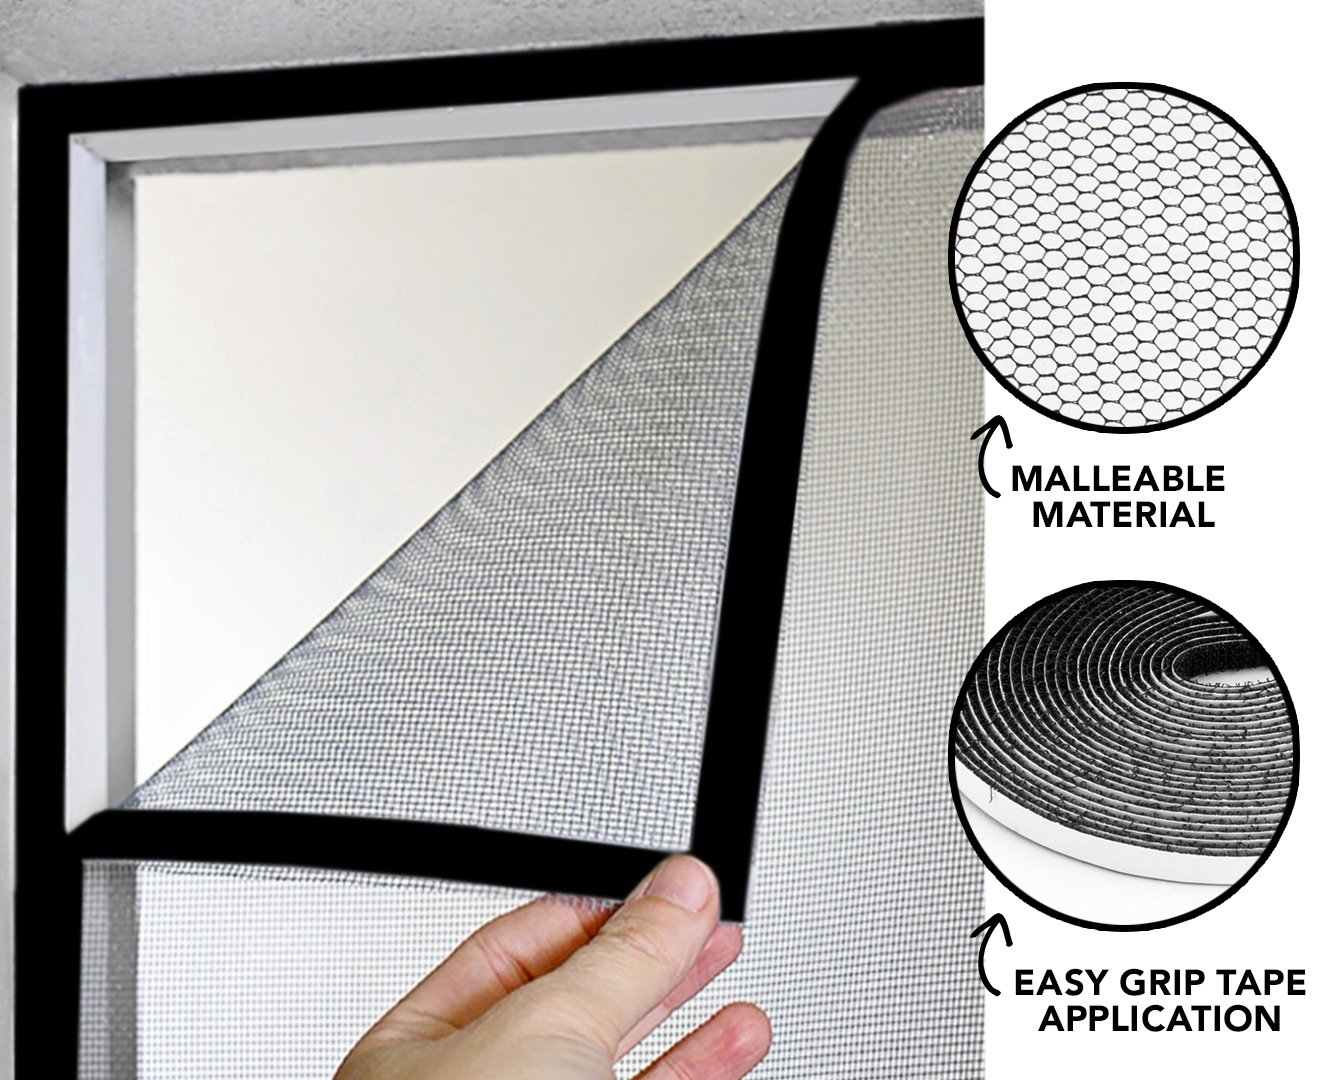 Greenlund Removable Window Fly Screen Kit 2-Pack | Catch.com.au